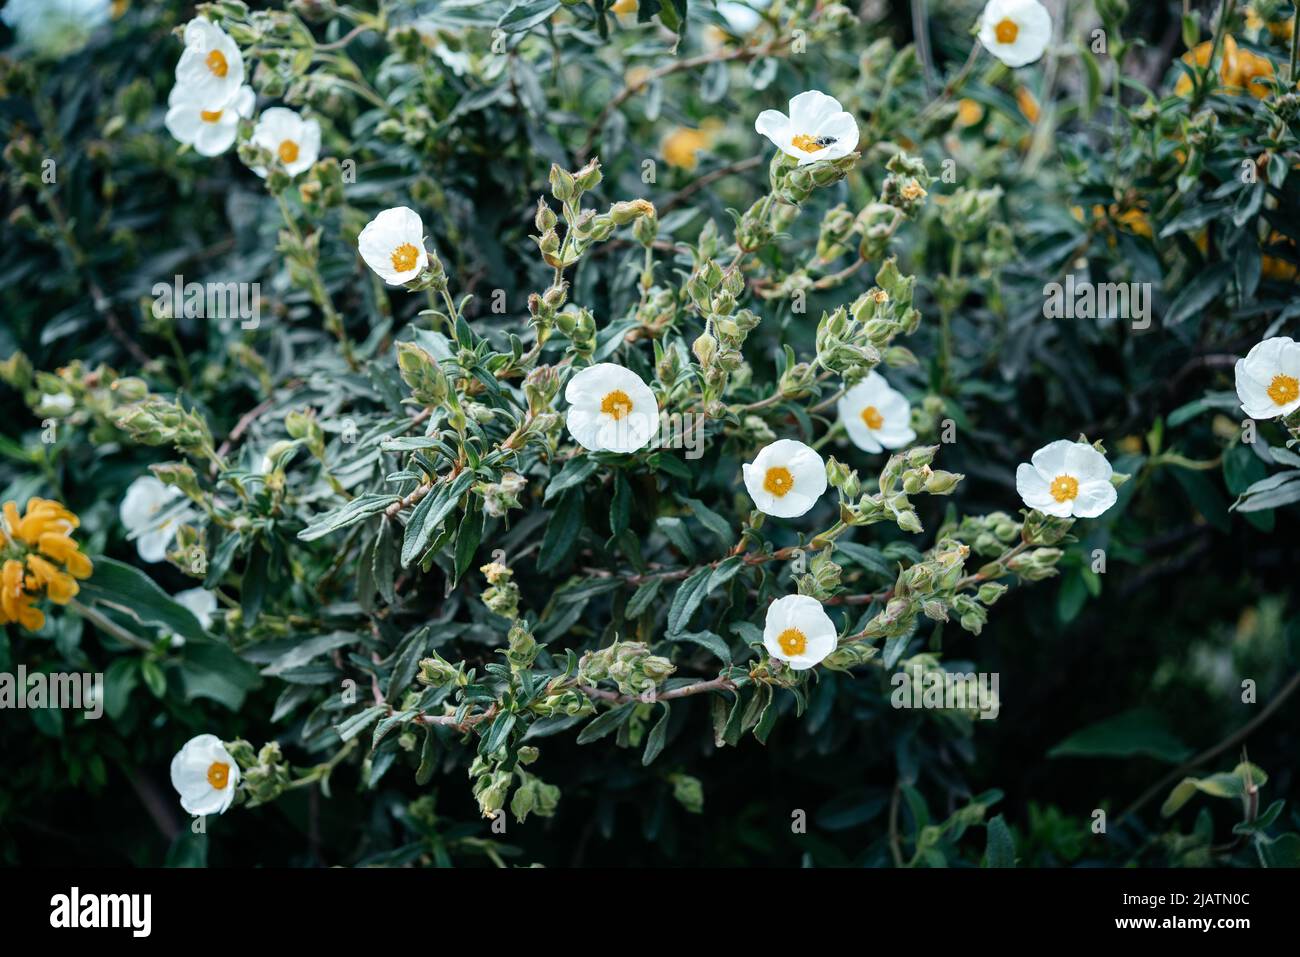 White Potentilla Abbotswood flower with a black bug in the garden in Italy Stock Photo